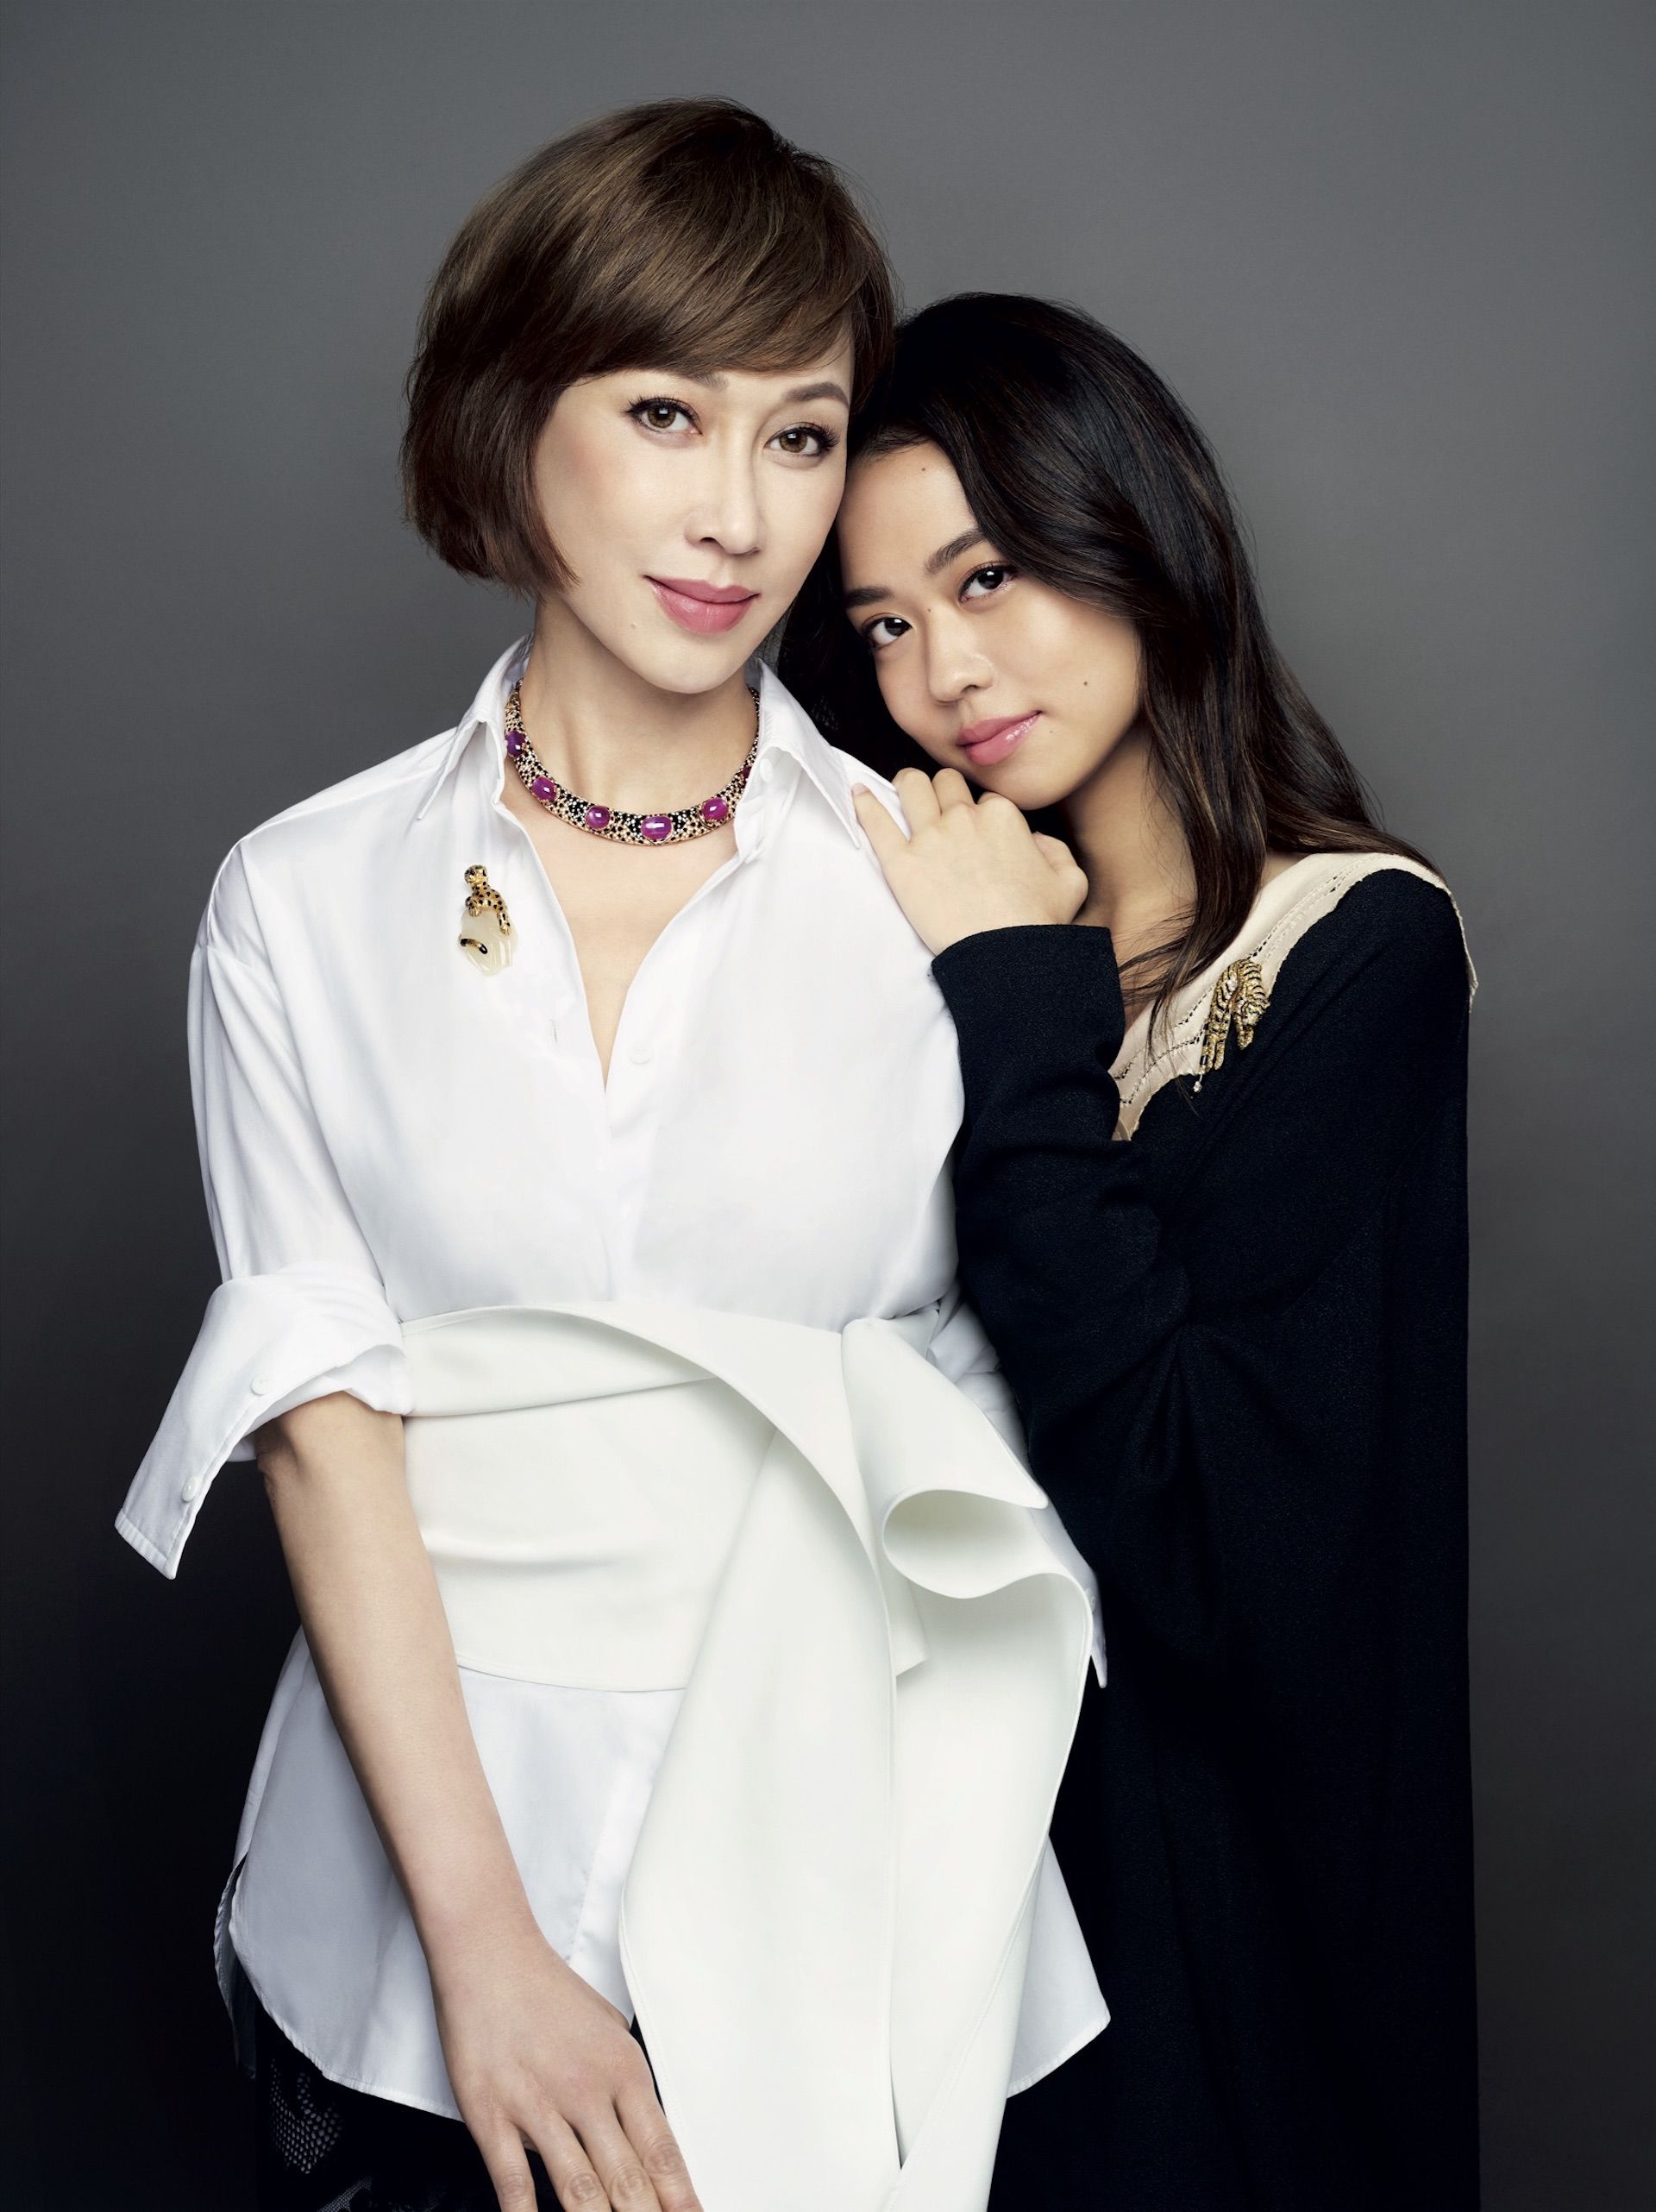 Grace and Coco Chng, the first in Singapore to model Cartier Collection archival pieces, share the same love for jewellery